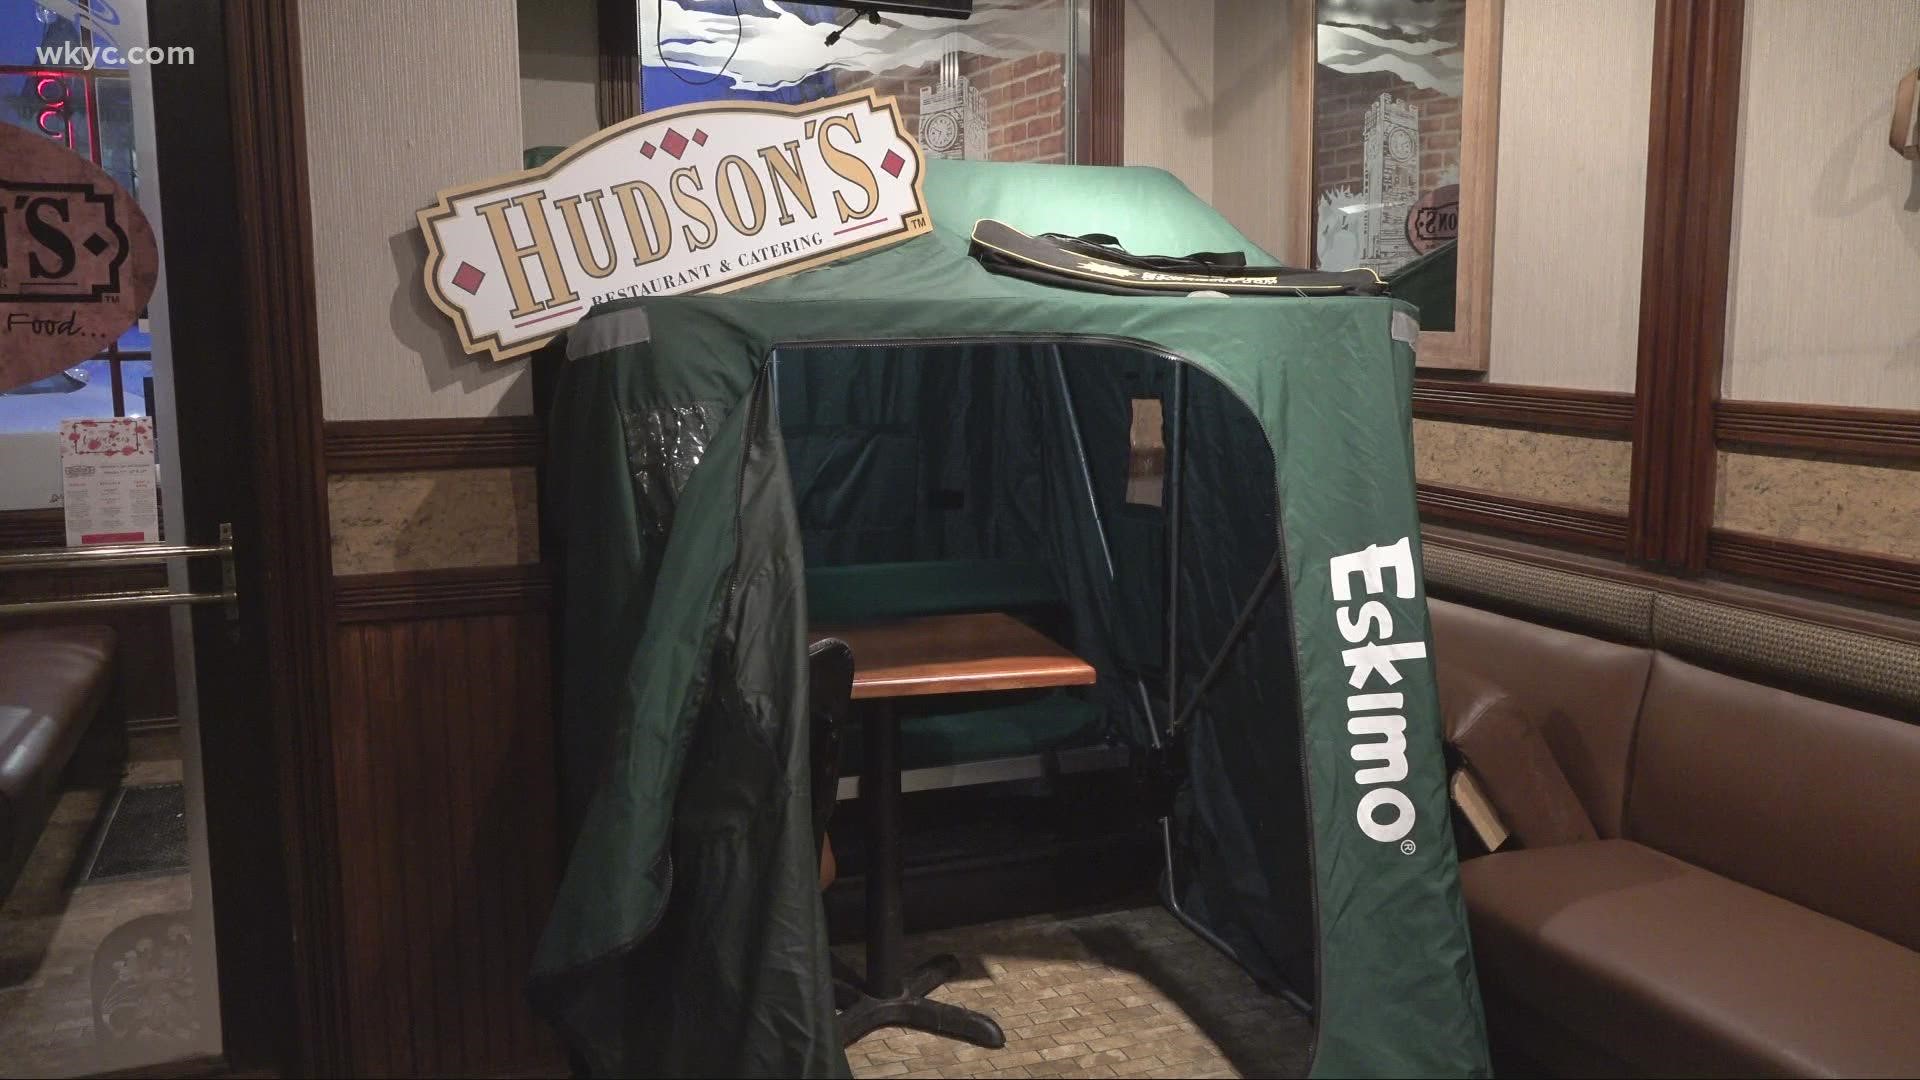 Hudson's Restaurant and Catering is taking advantage of Mayor Craig Shubert's viral comment. The restaurant has a special shanty and new drink specials.